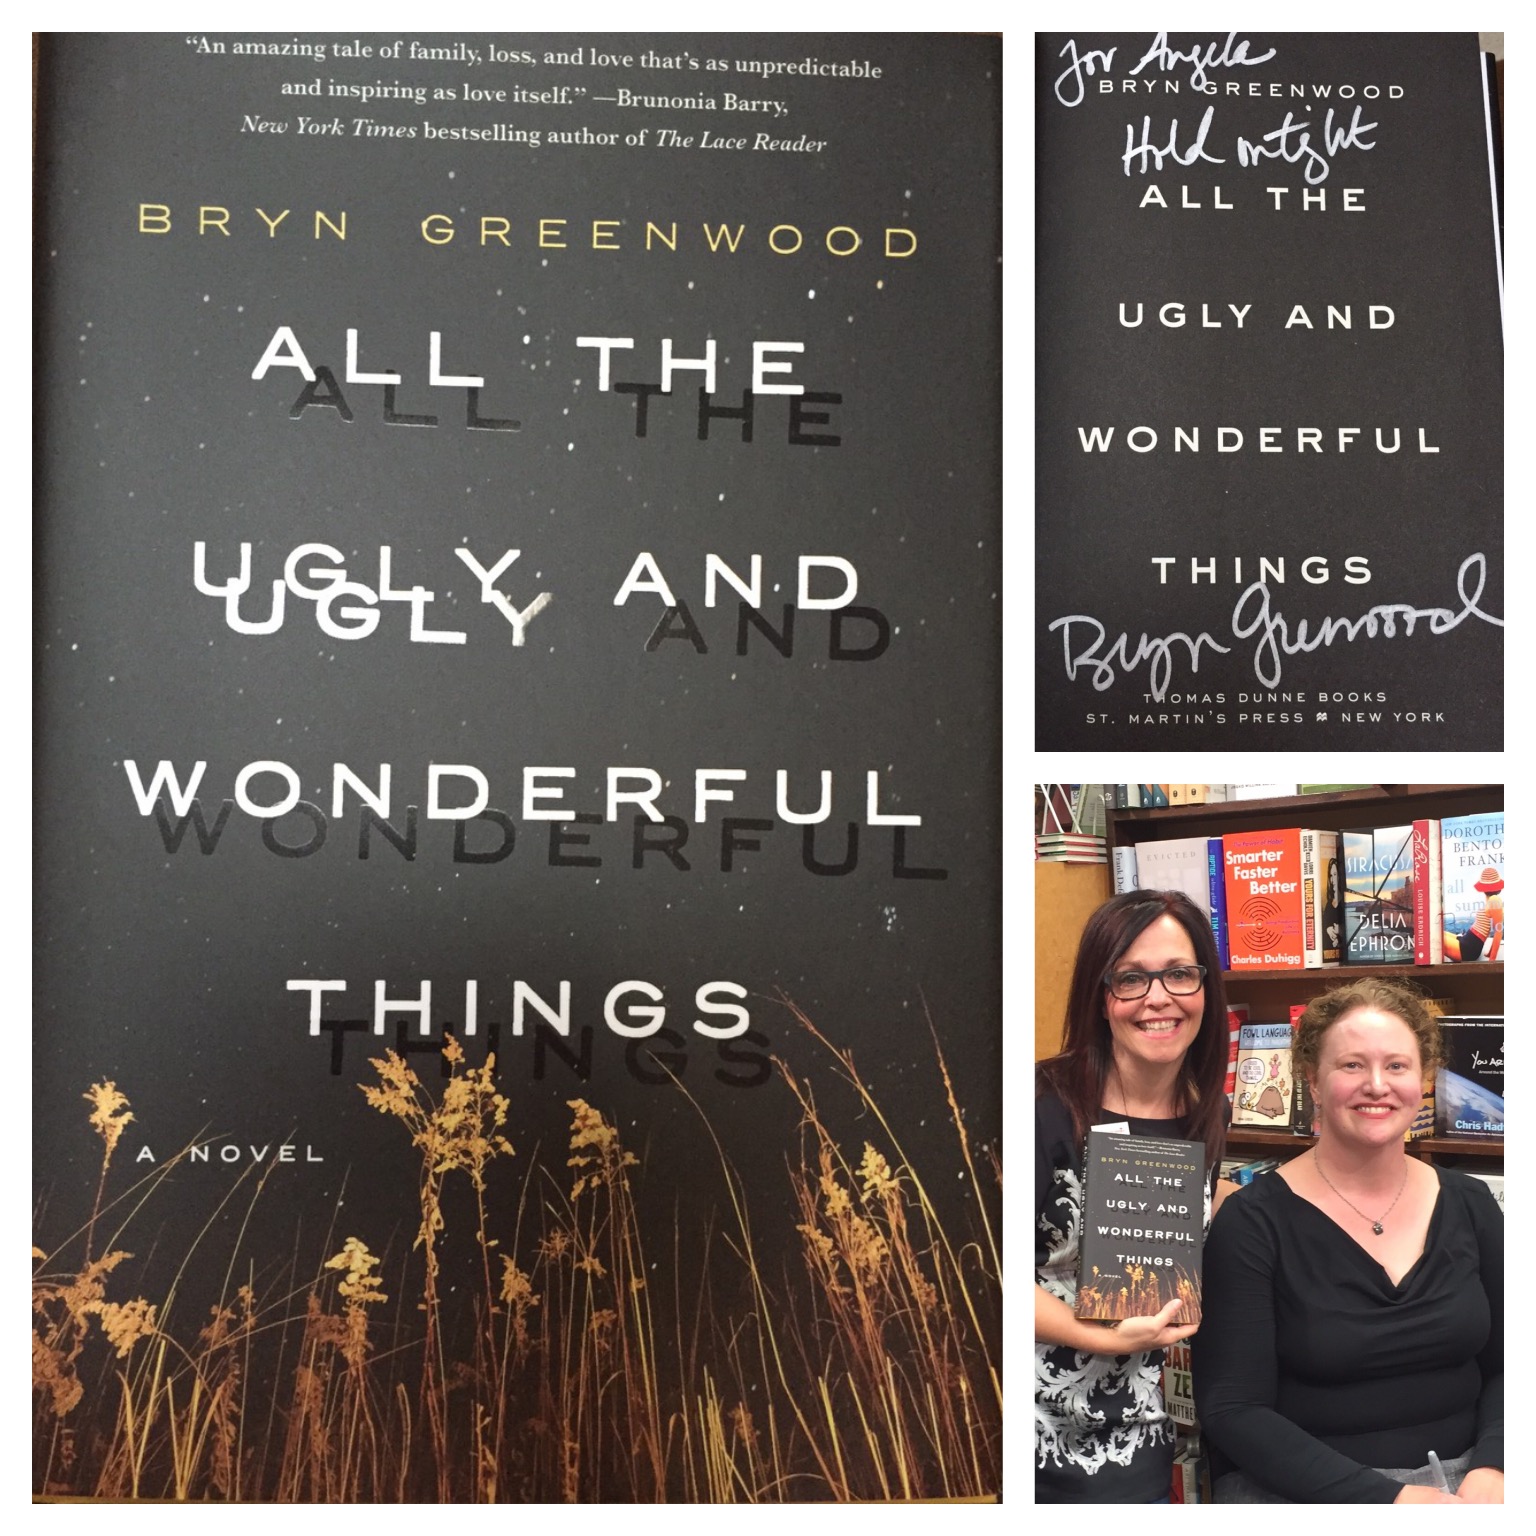 all the ugly and wonderful things by bryn greenwood